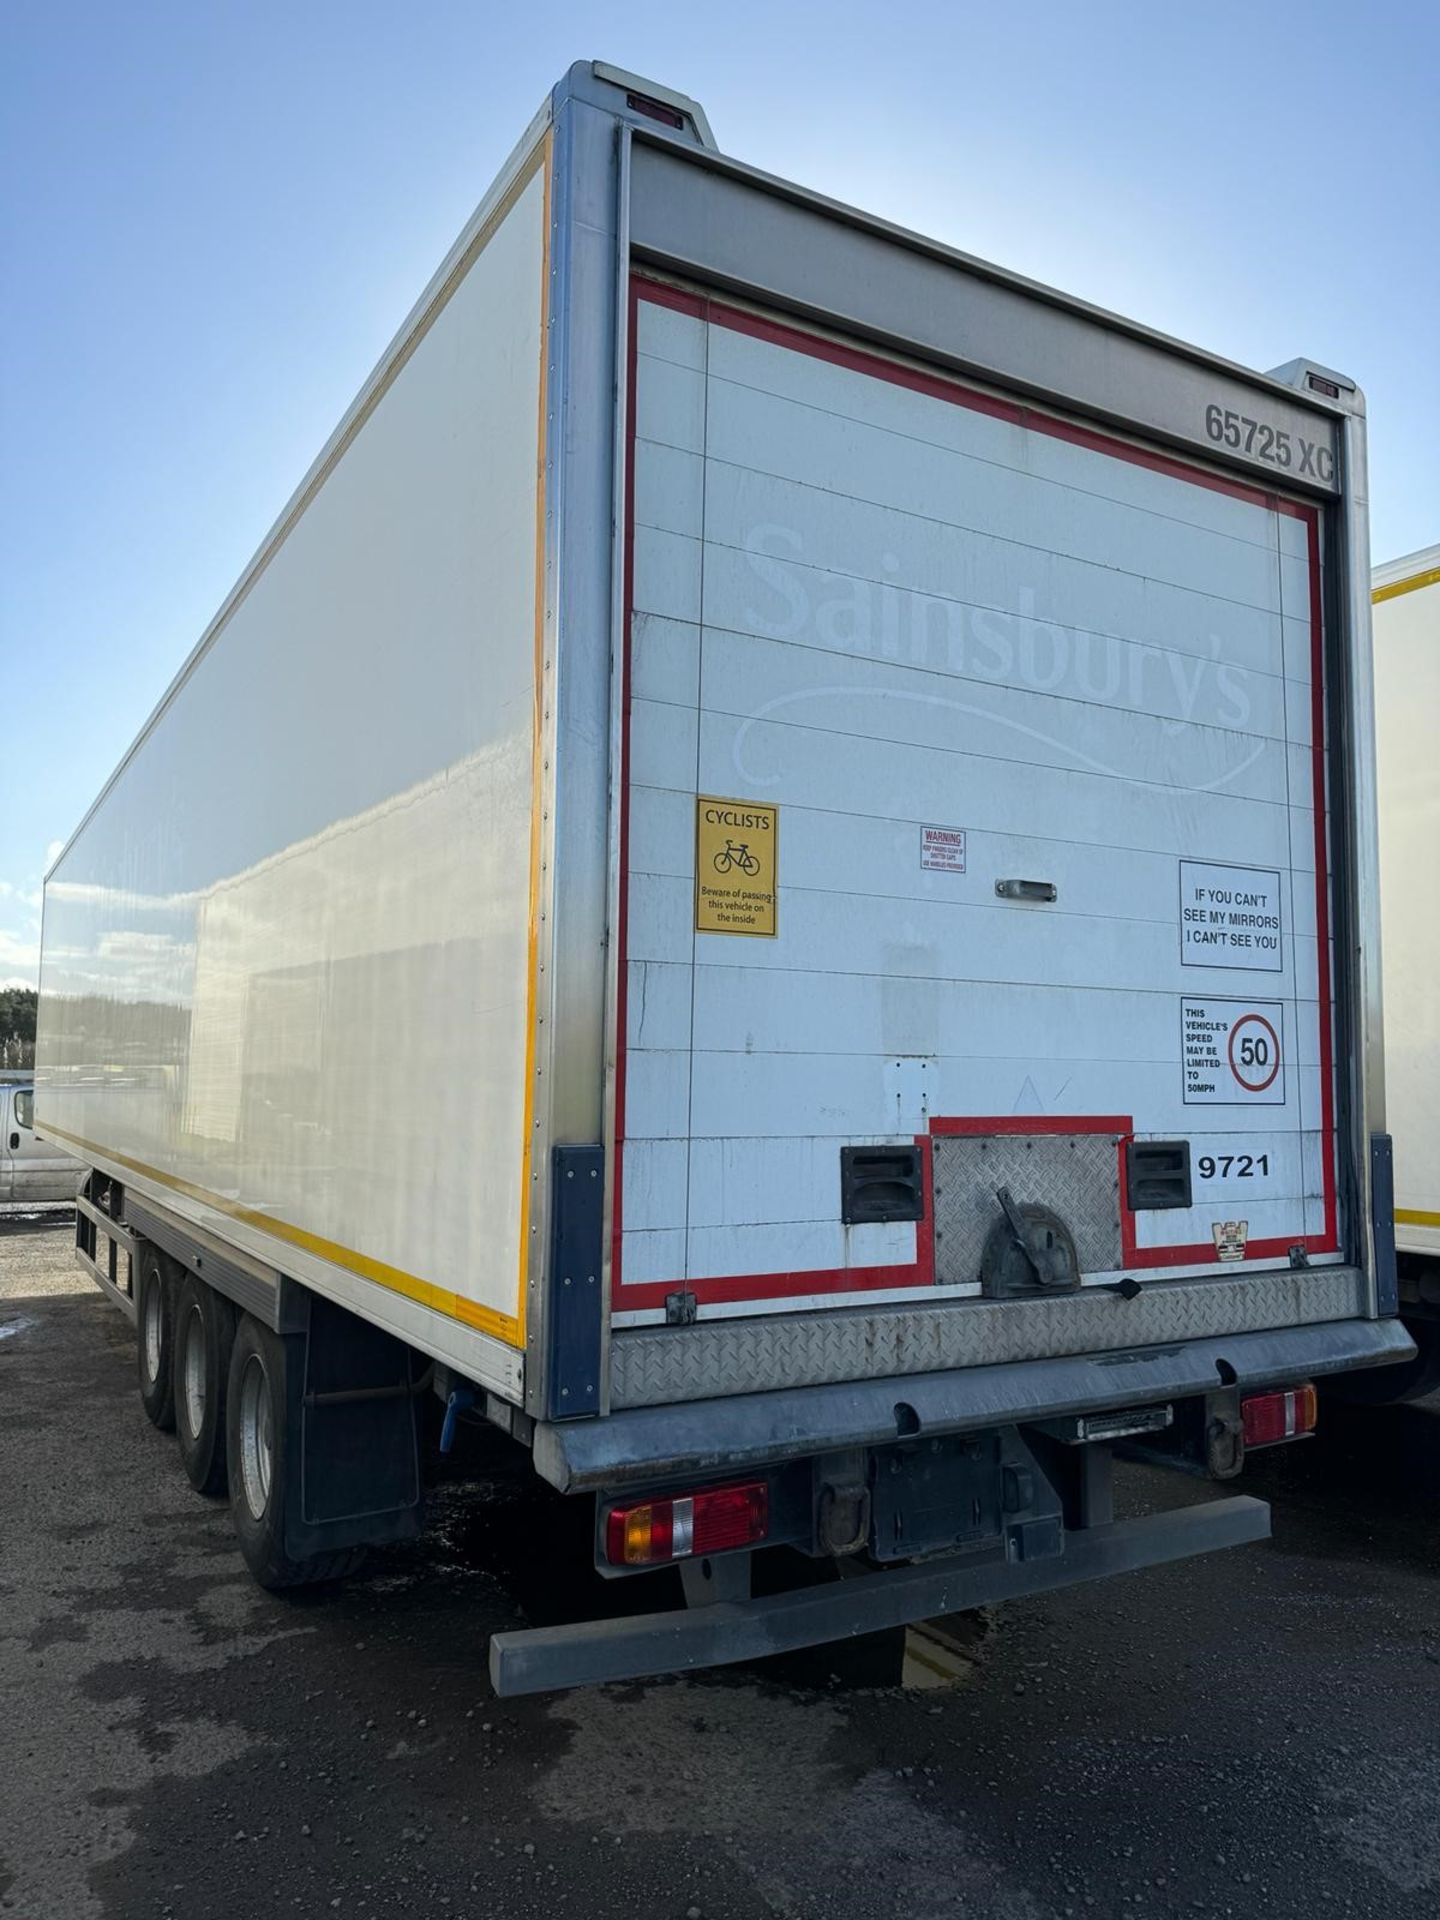 2015 Montracon 13.6 Refrigerated Multi-Temp Trailer - Image 10 of 13